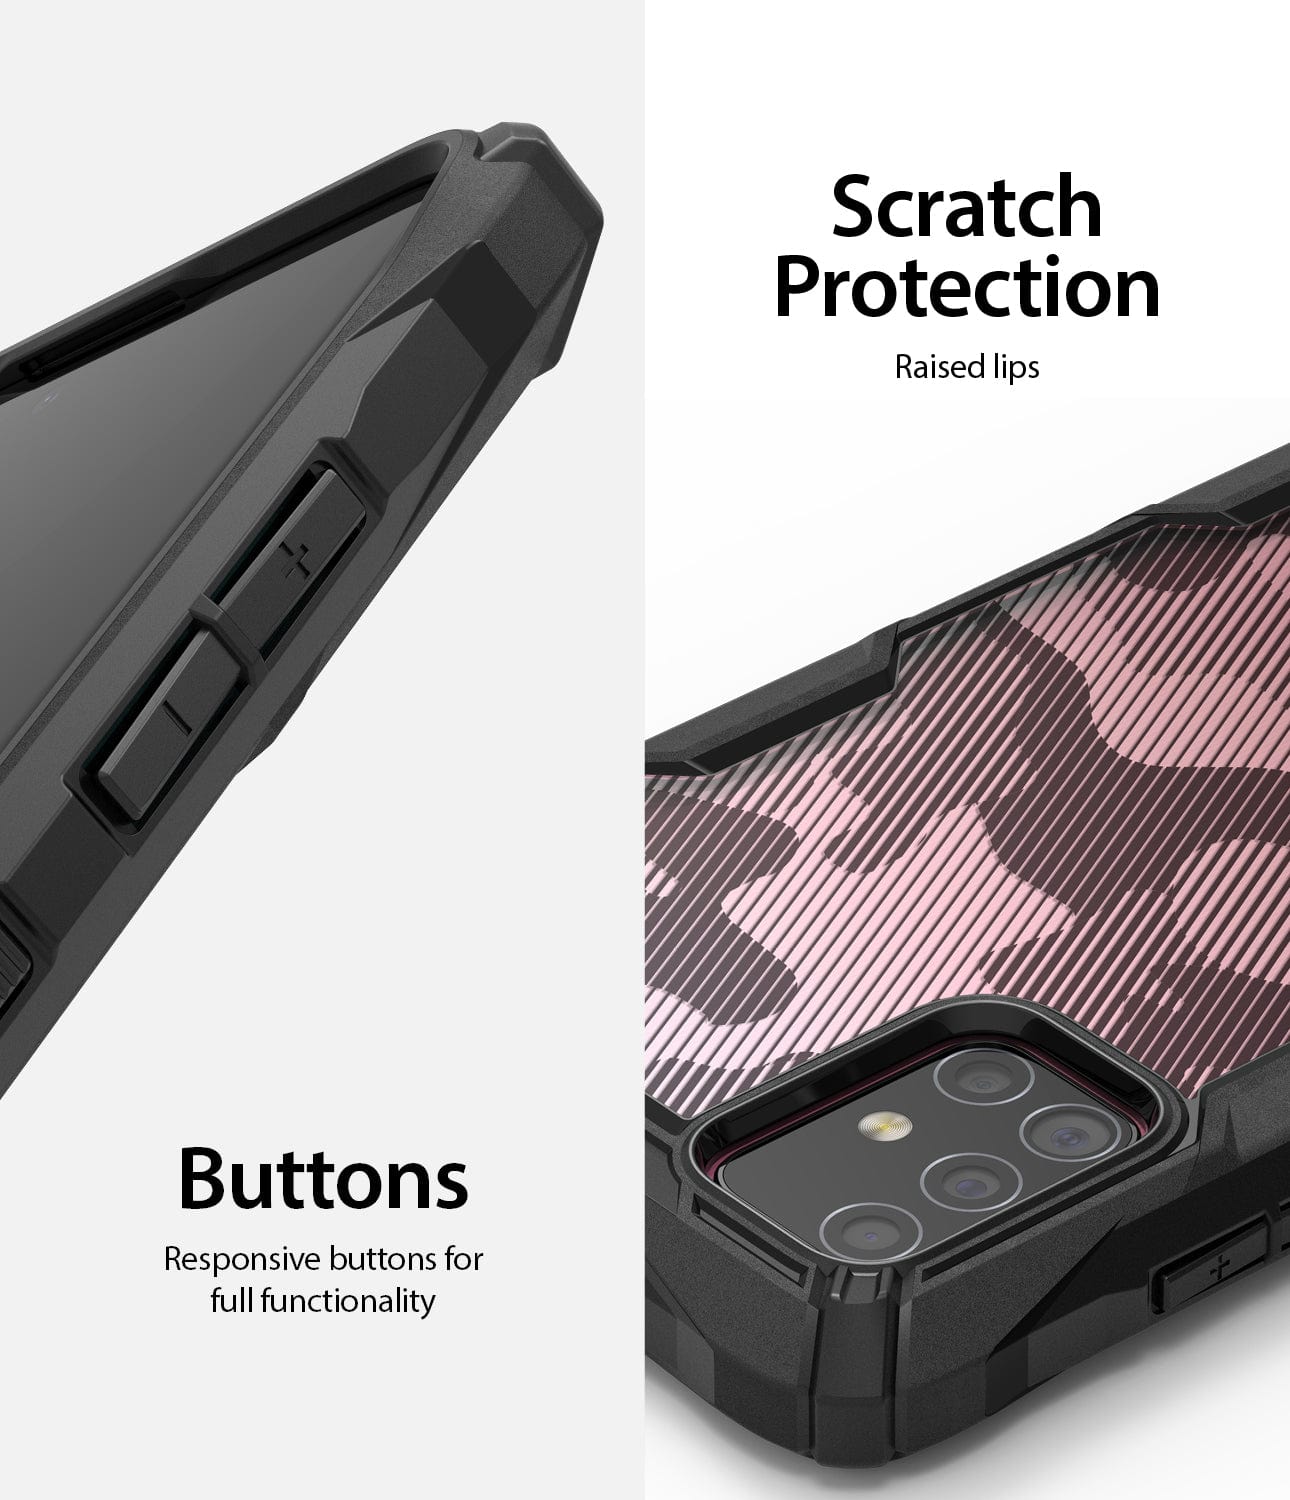 Scratch protection raised lips and responsive buttons 